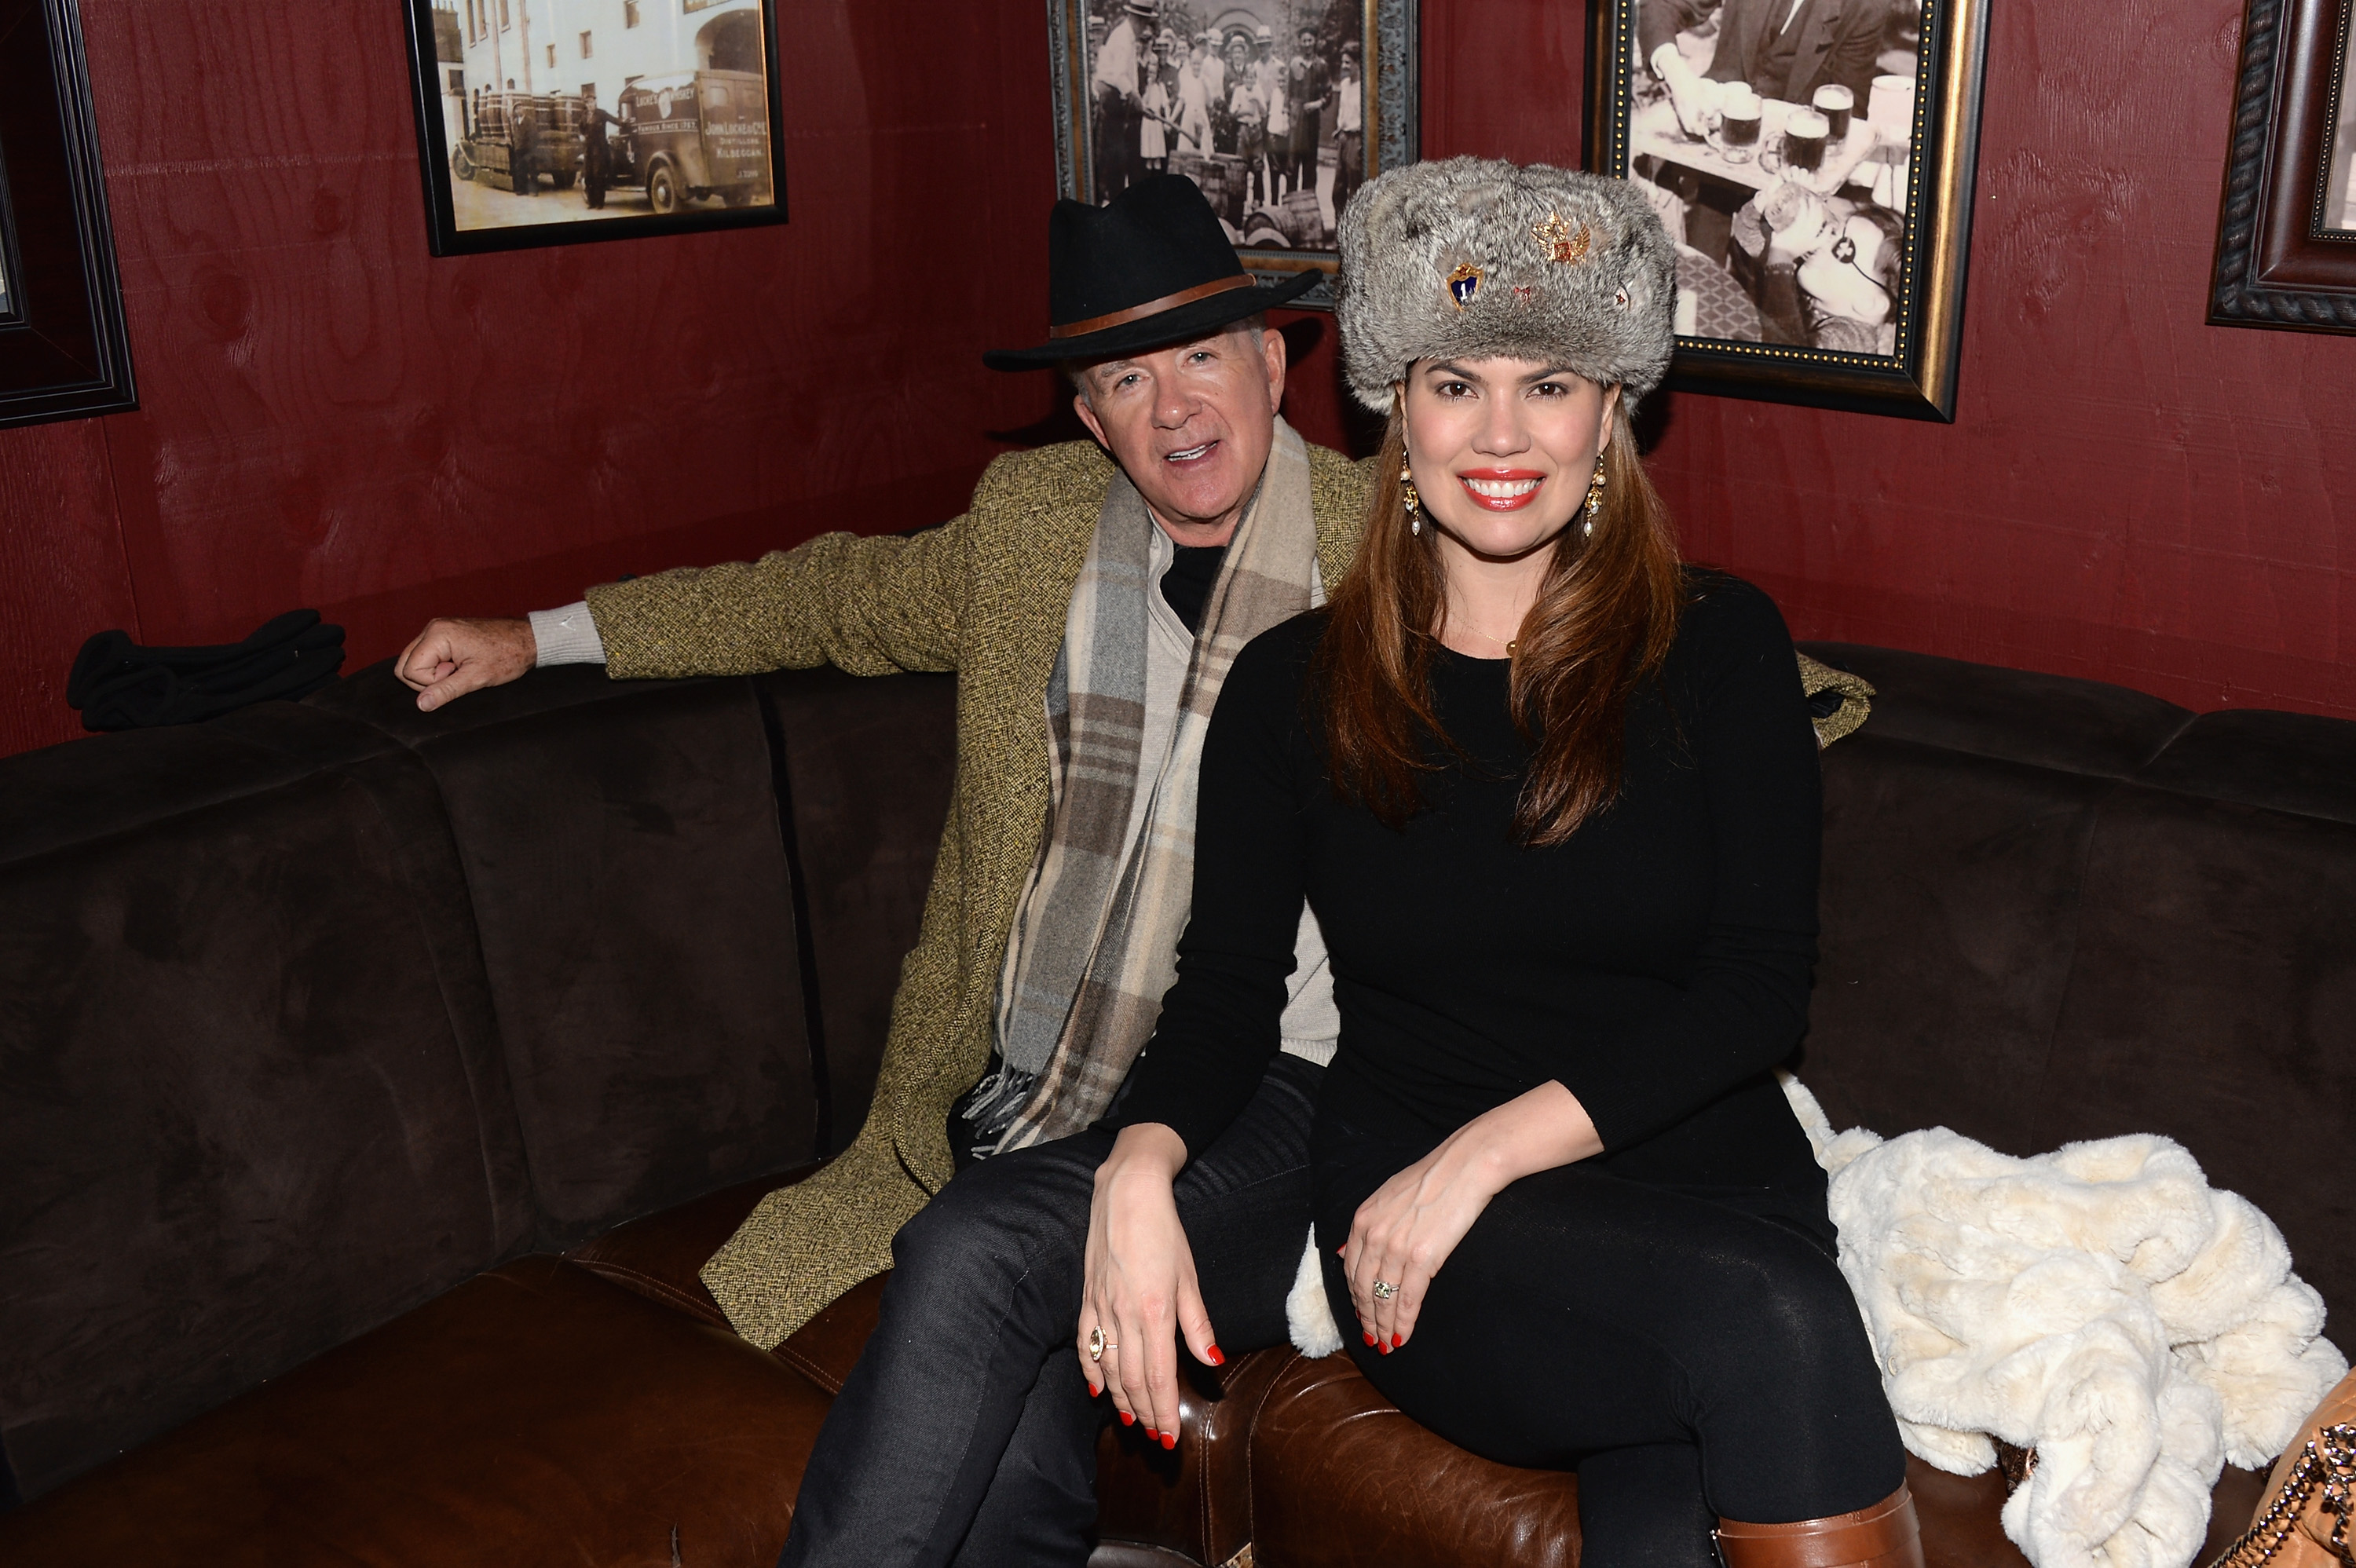  Alan Thicke and Tanya Callau - For ONE Night Only, Hosted By The ONE Group + Gansevoort Hotel Group At Rock & Reilly's - 2014 Park City